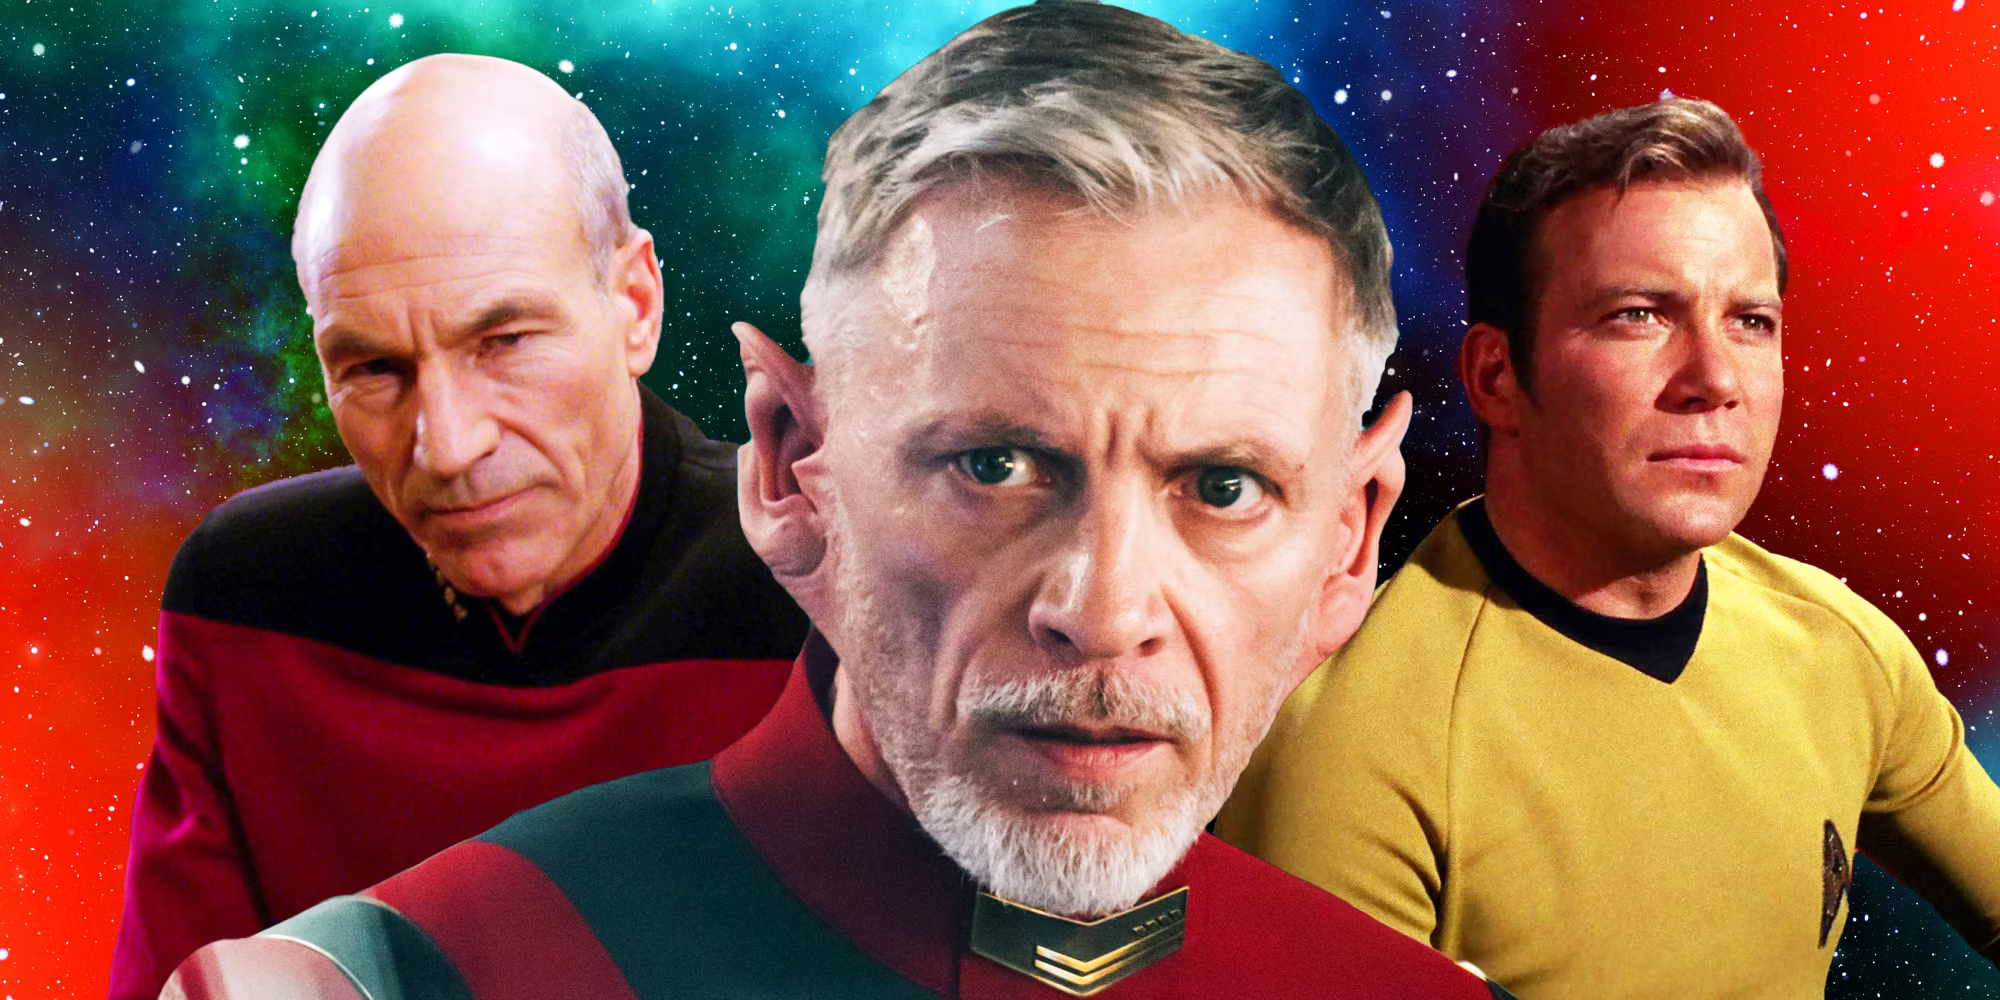 captain-kirk-from-original-series-picard-from-tng-on-either-side-with-captain-rayner-in-the-middle